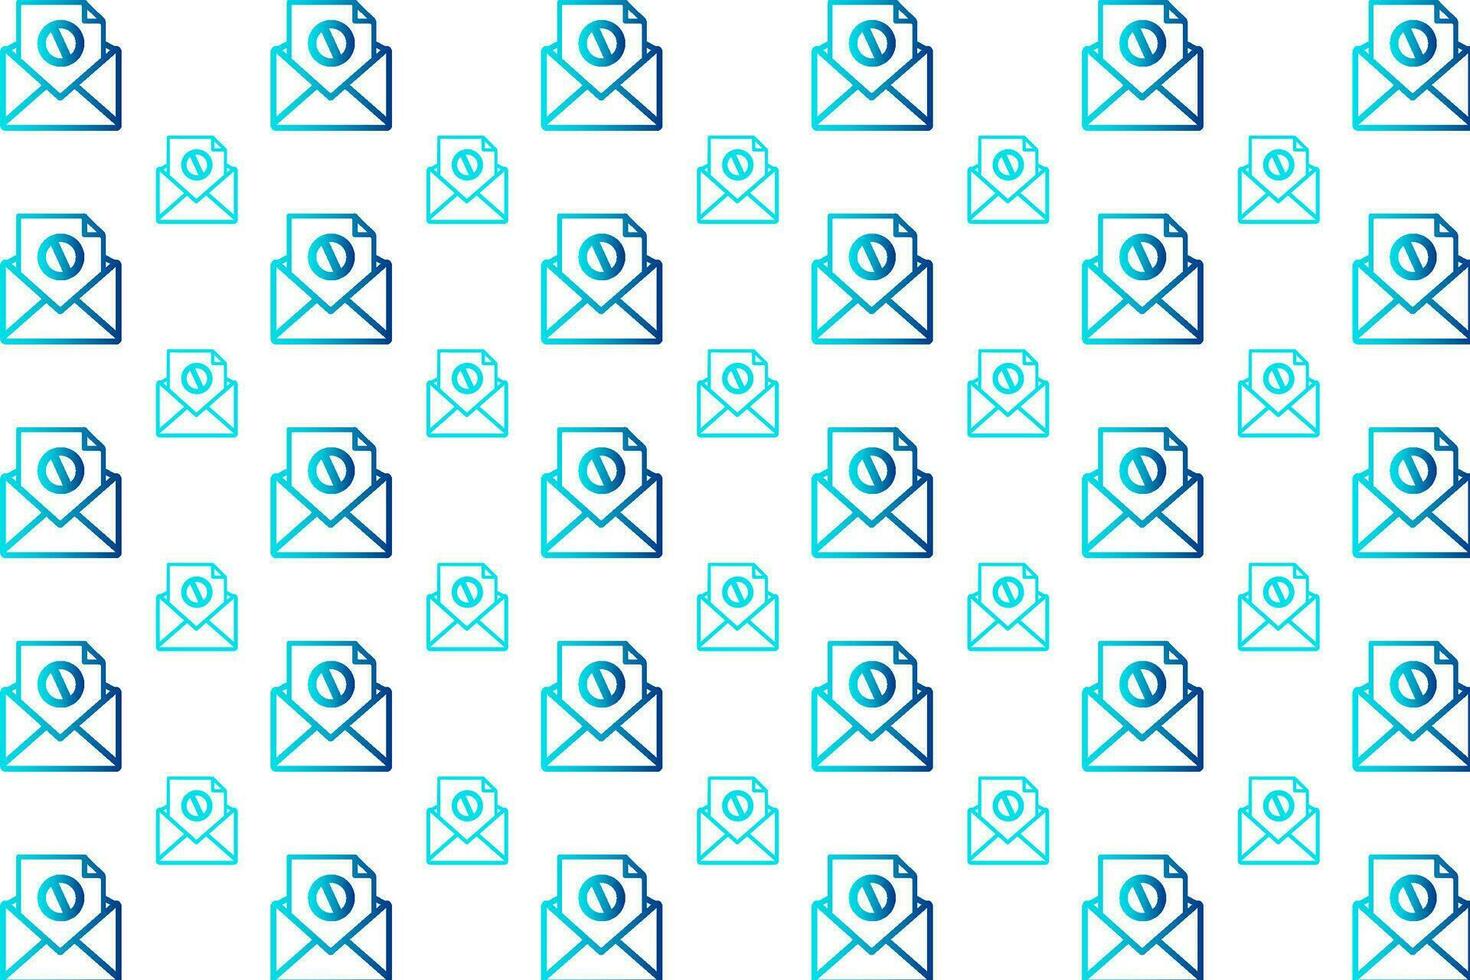 abstract spam mail patroon achtergrond vector